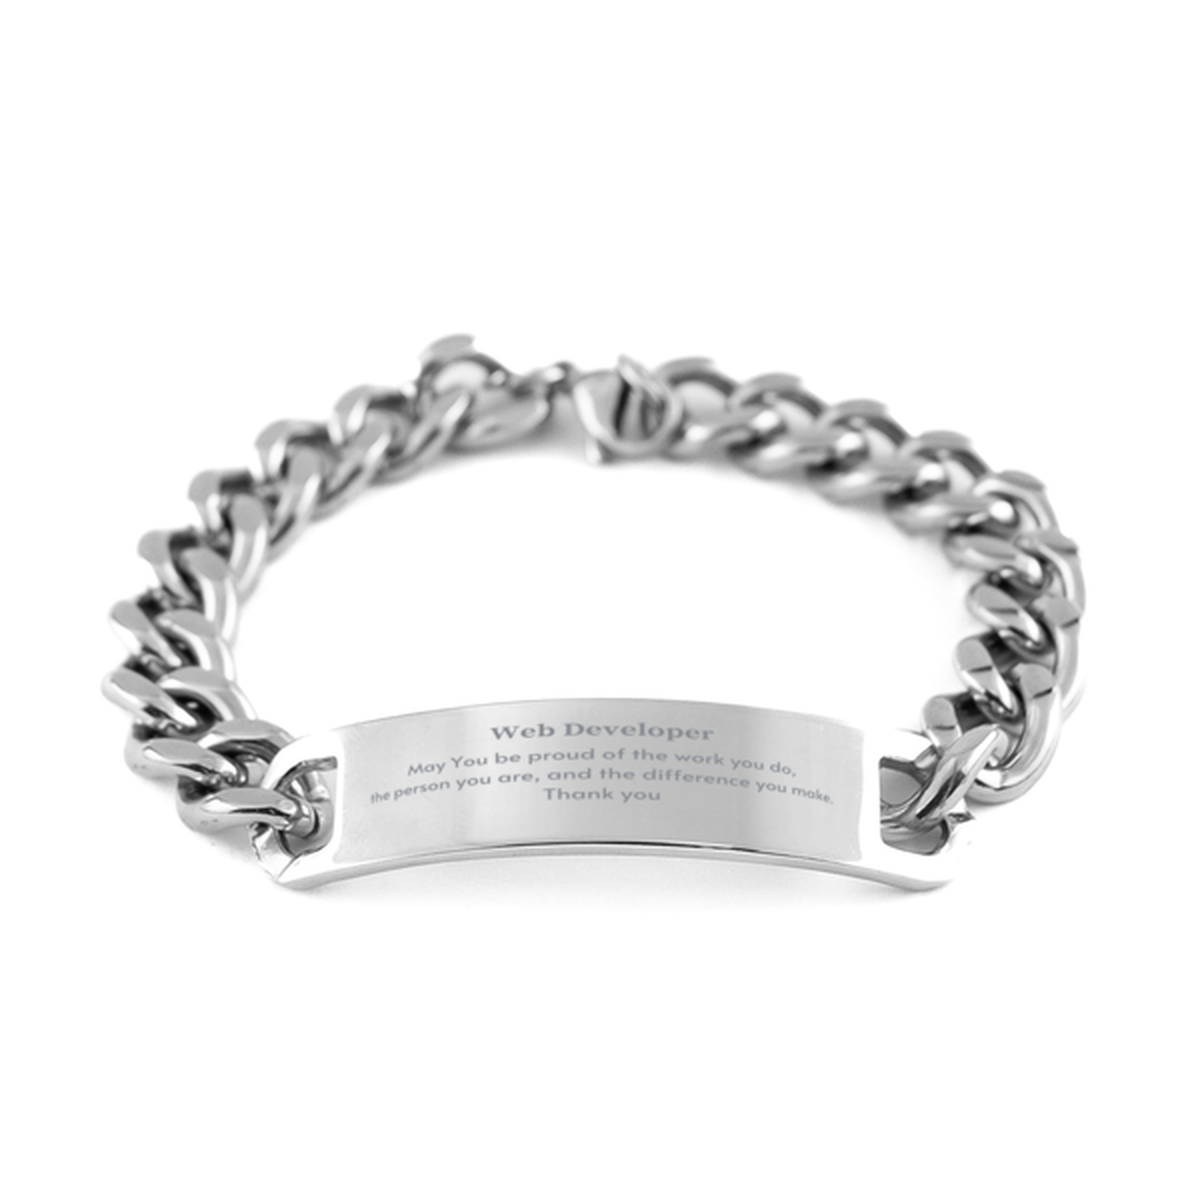 Heartwarming Cuban Chain Stainless Steel Bracelet Retirement Coworkers Gifts for Web Developer, Web Developer May You be proud of the work you do, the person you are Gifts for Boss Men Women Friends